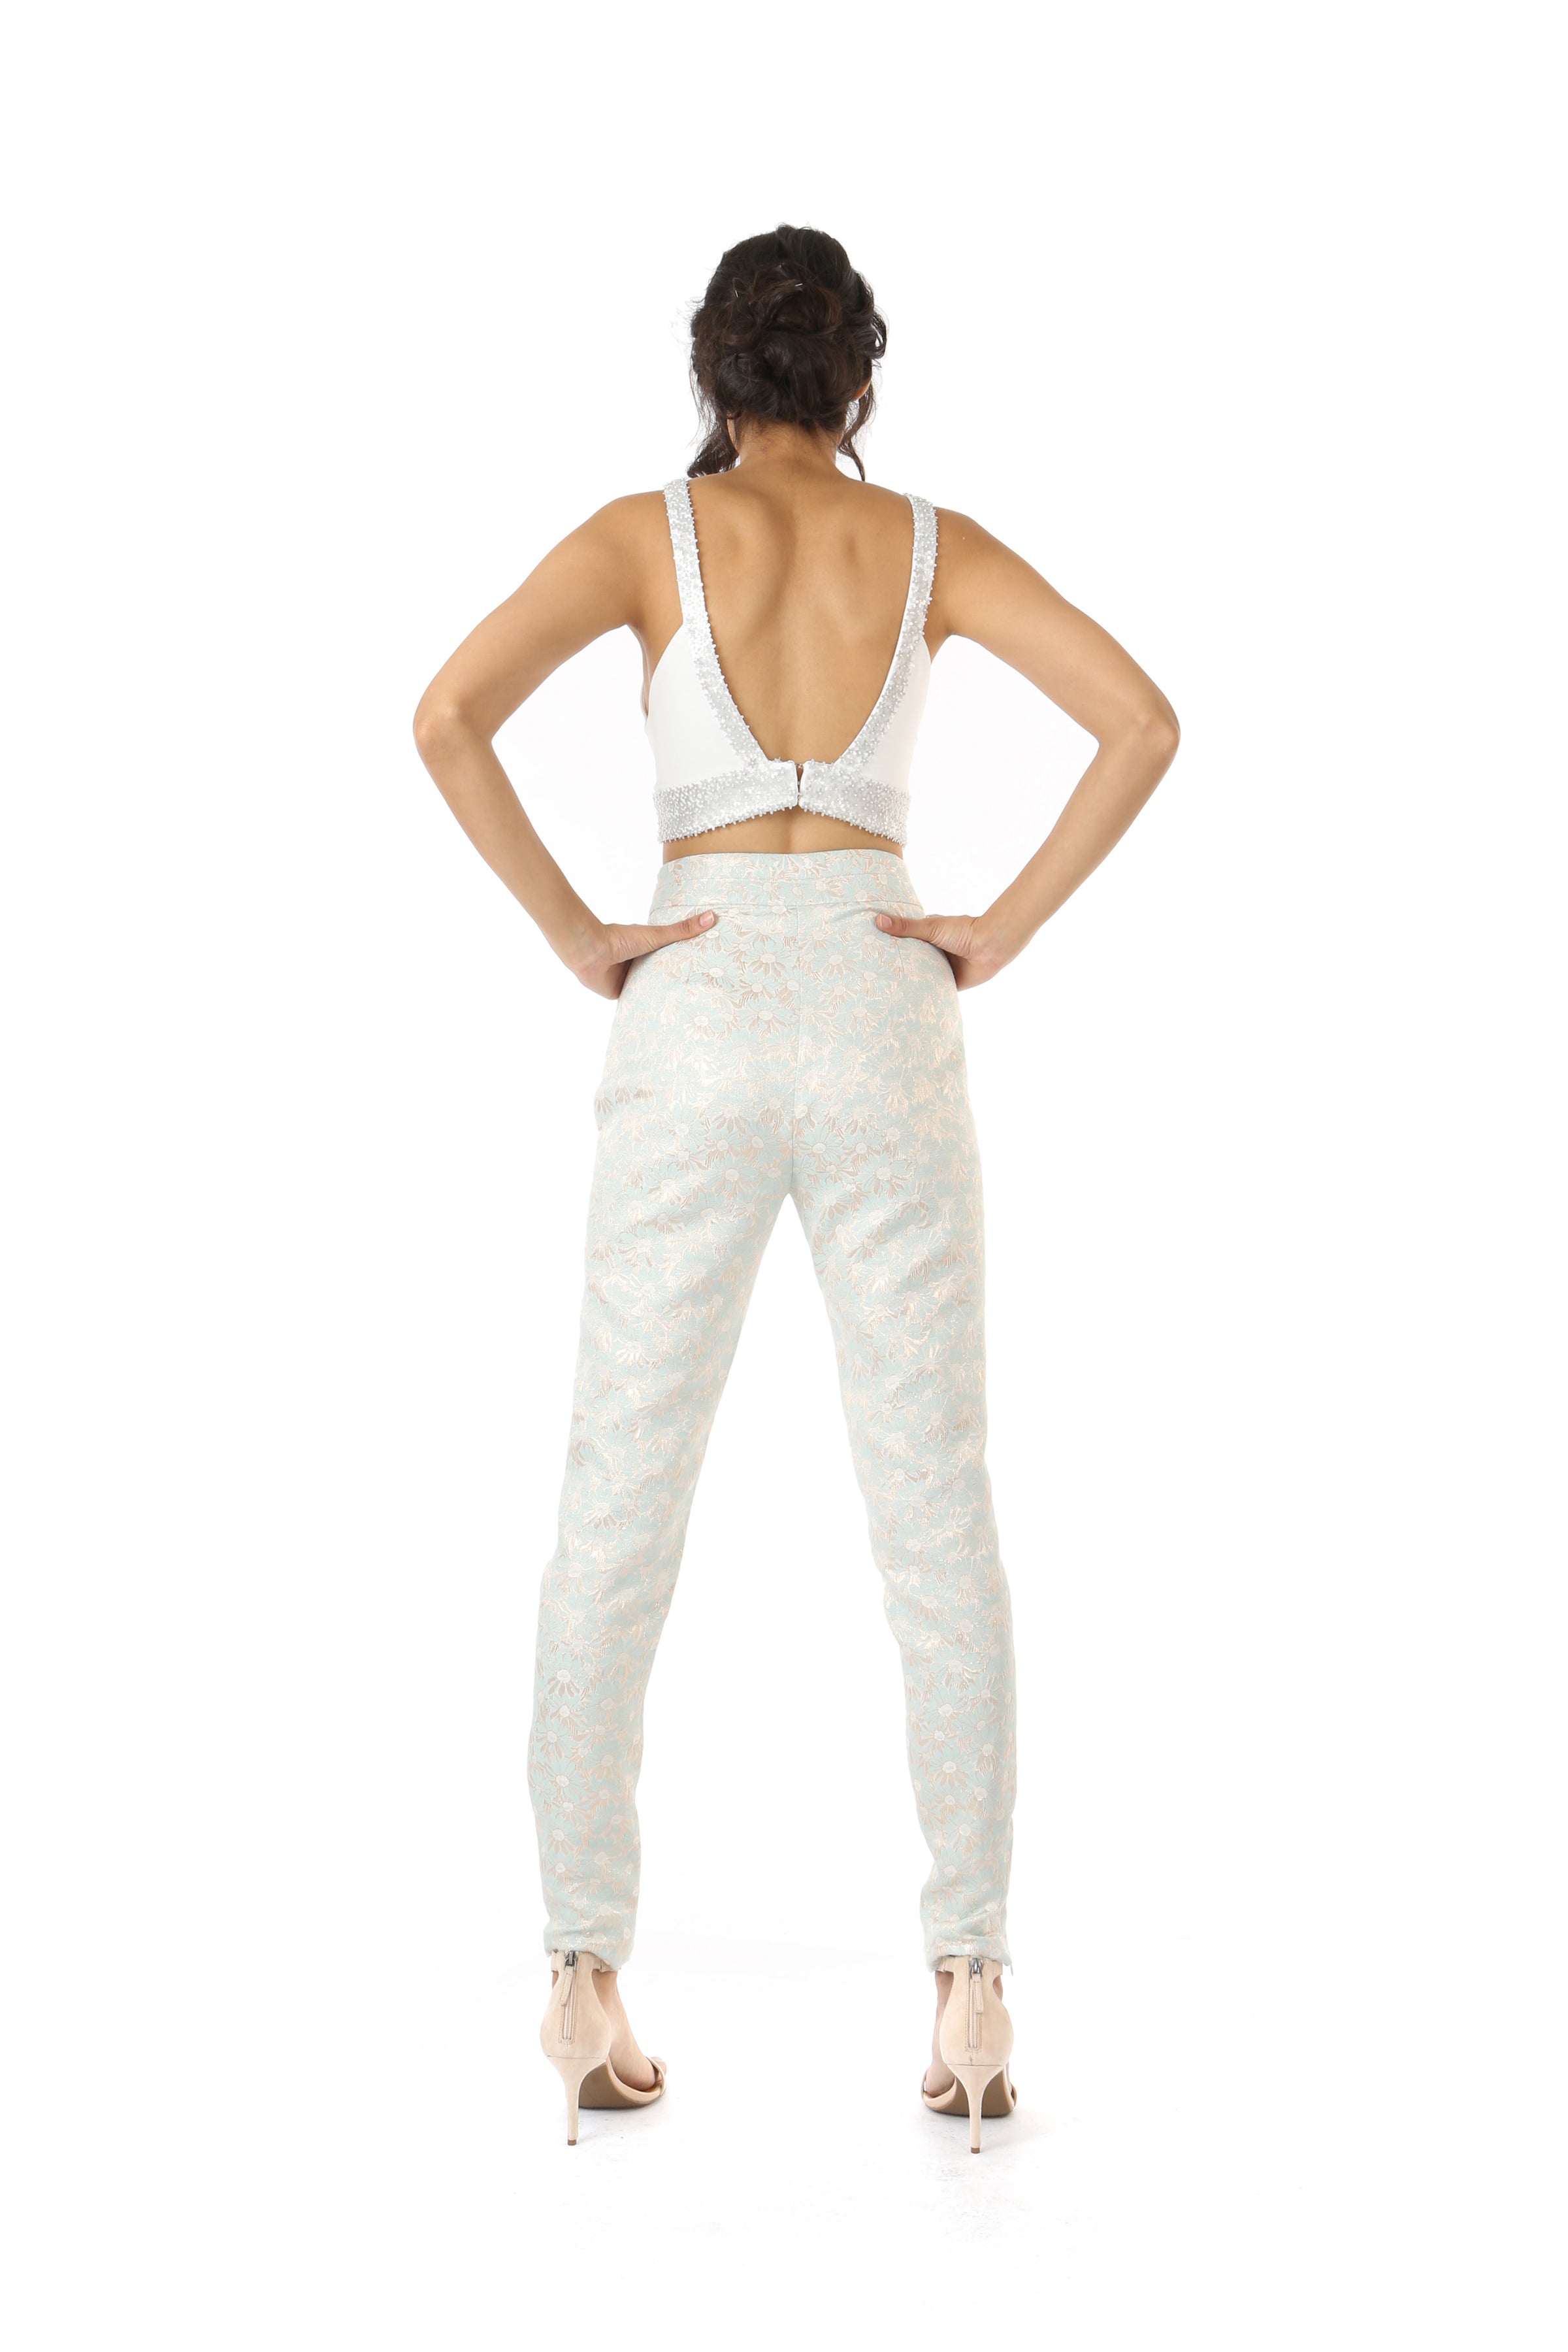 Harleen Kaur Julia Stretch Open Back Top with Floral Sequin Trim - White Back View